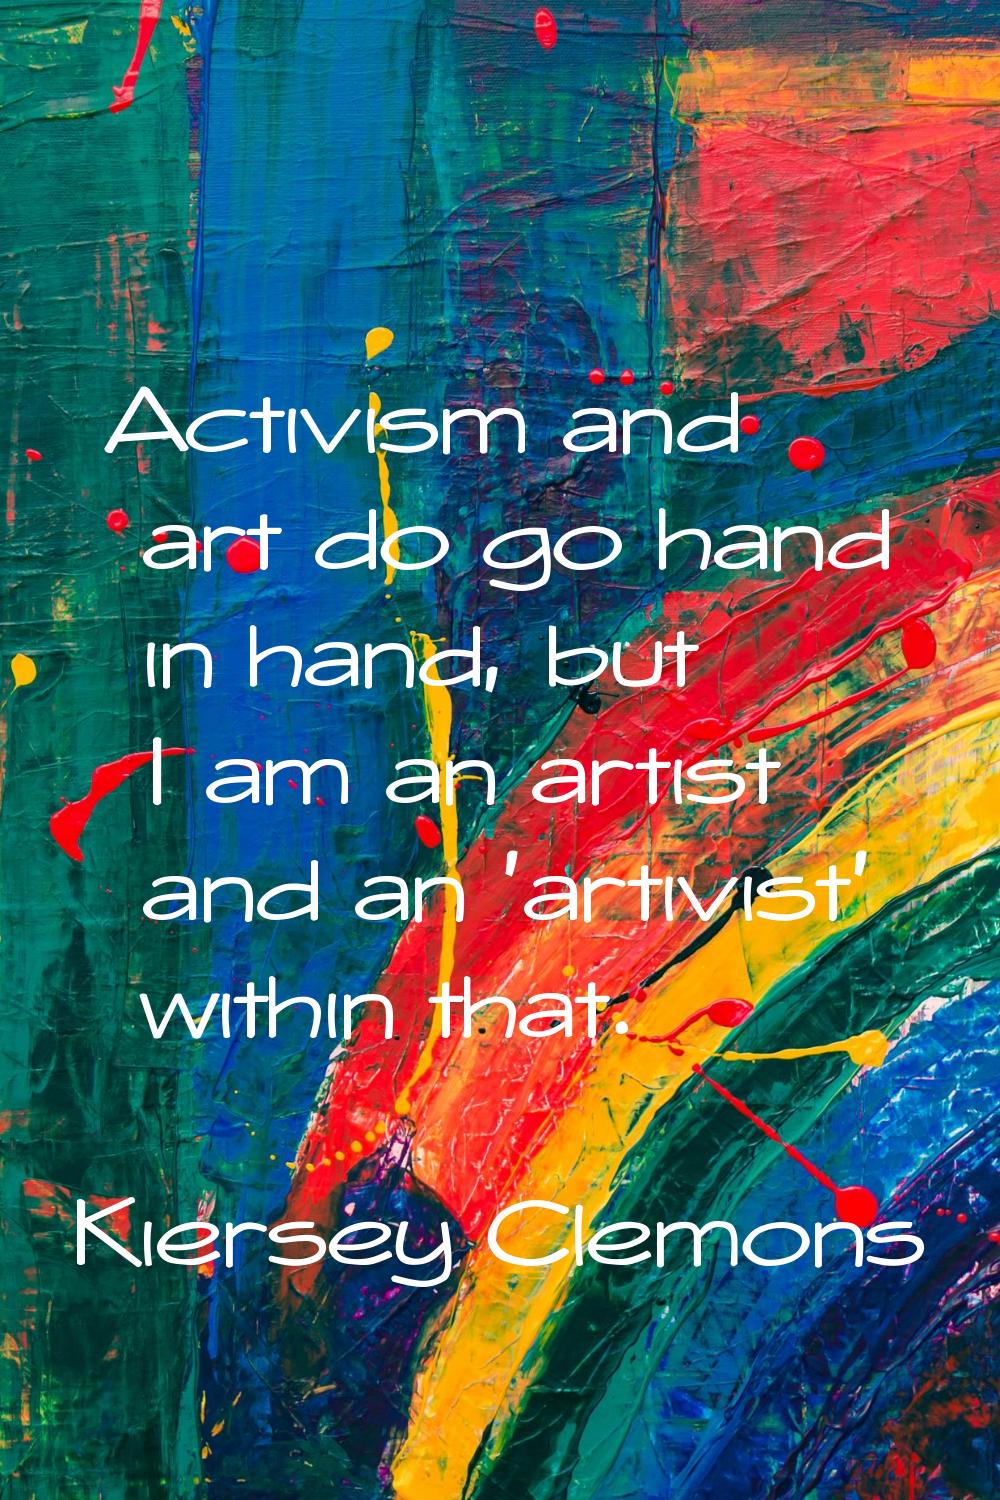 Activism and art do go hand in hand, but I am an artist and an 'artivist' within that.